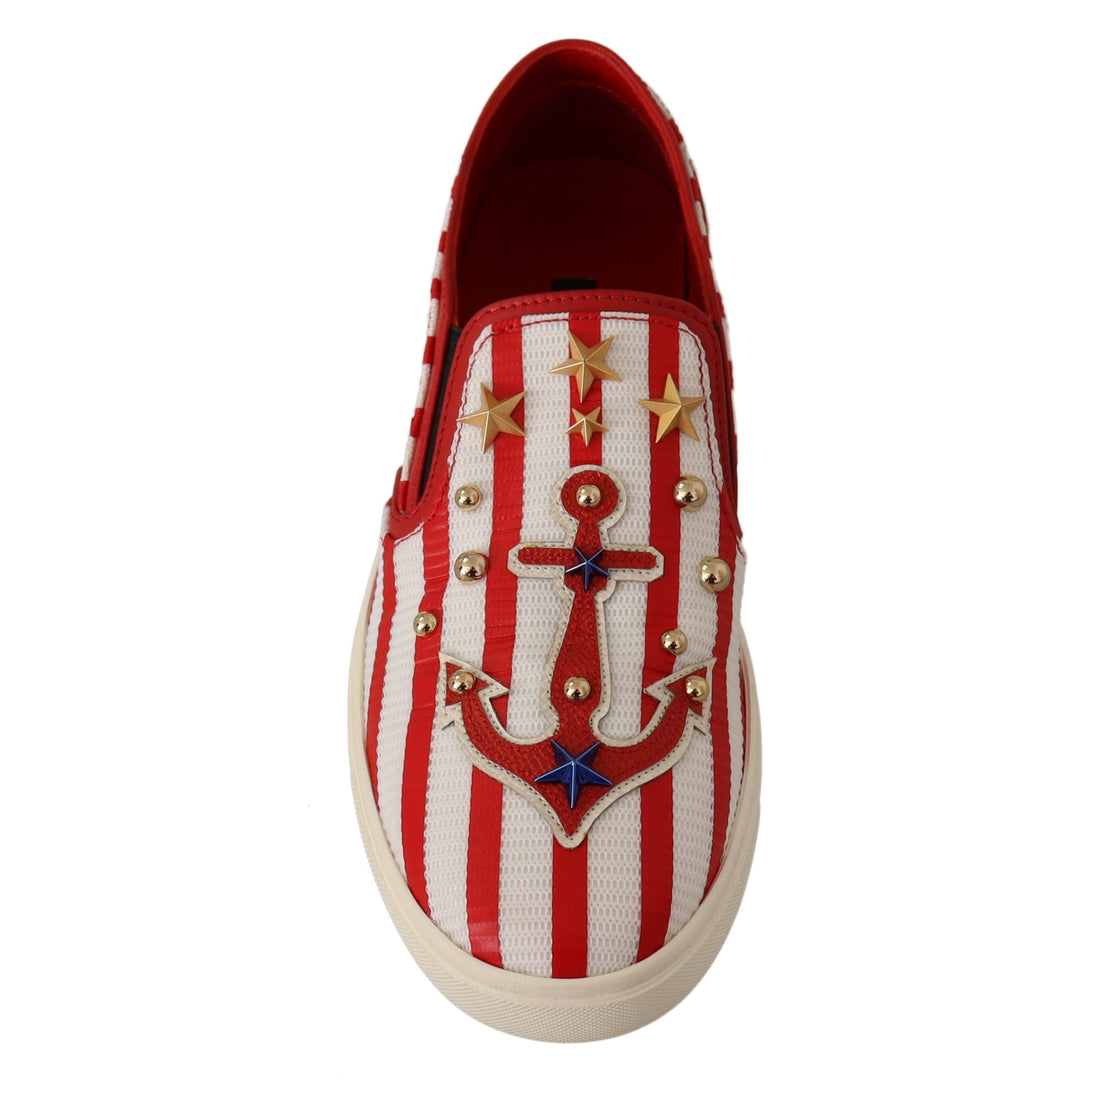 Dolce & Gabbana Red White Anchor Studded Loafers Shoes